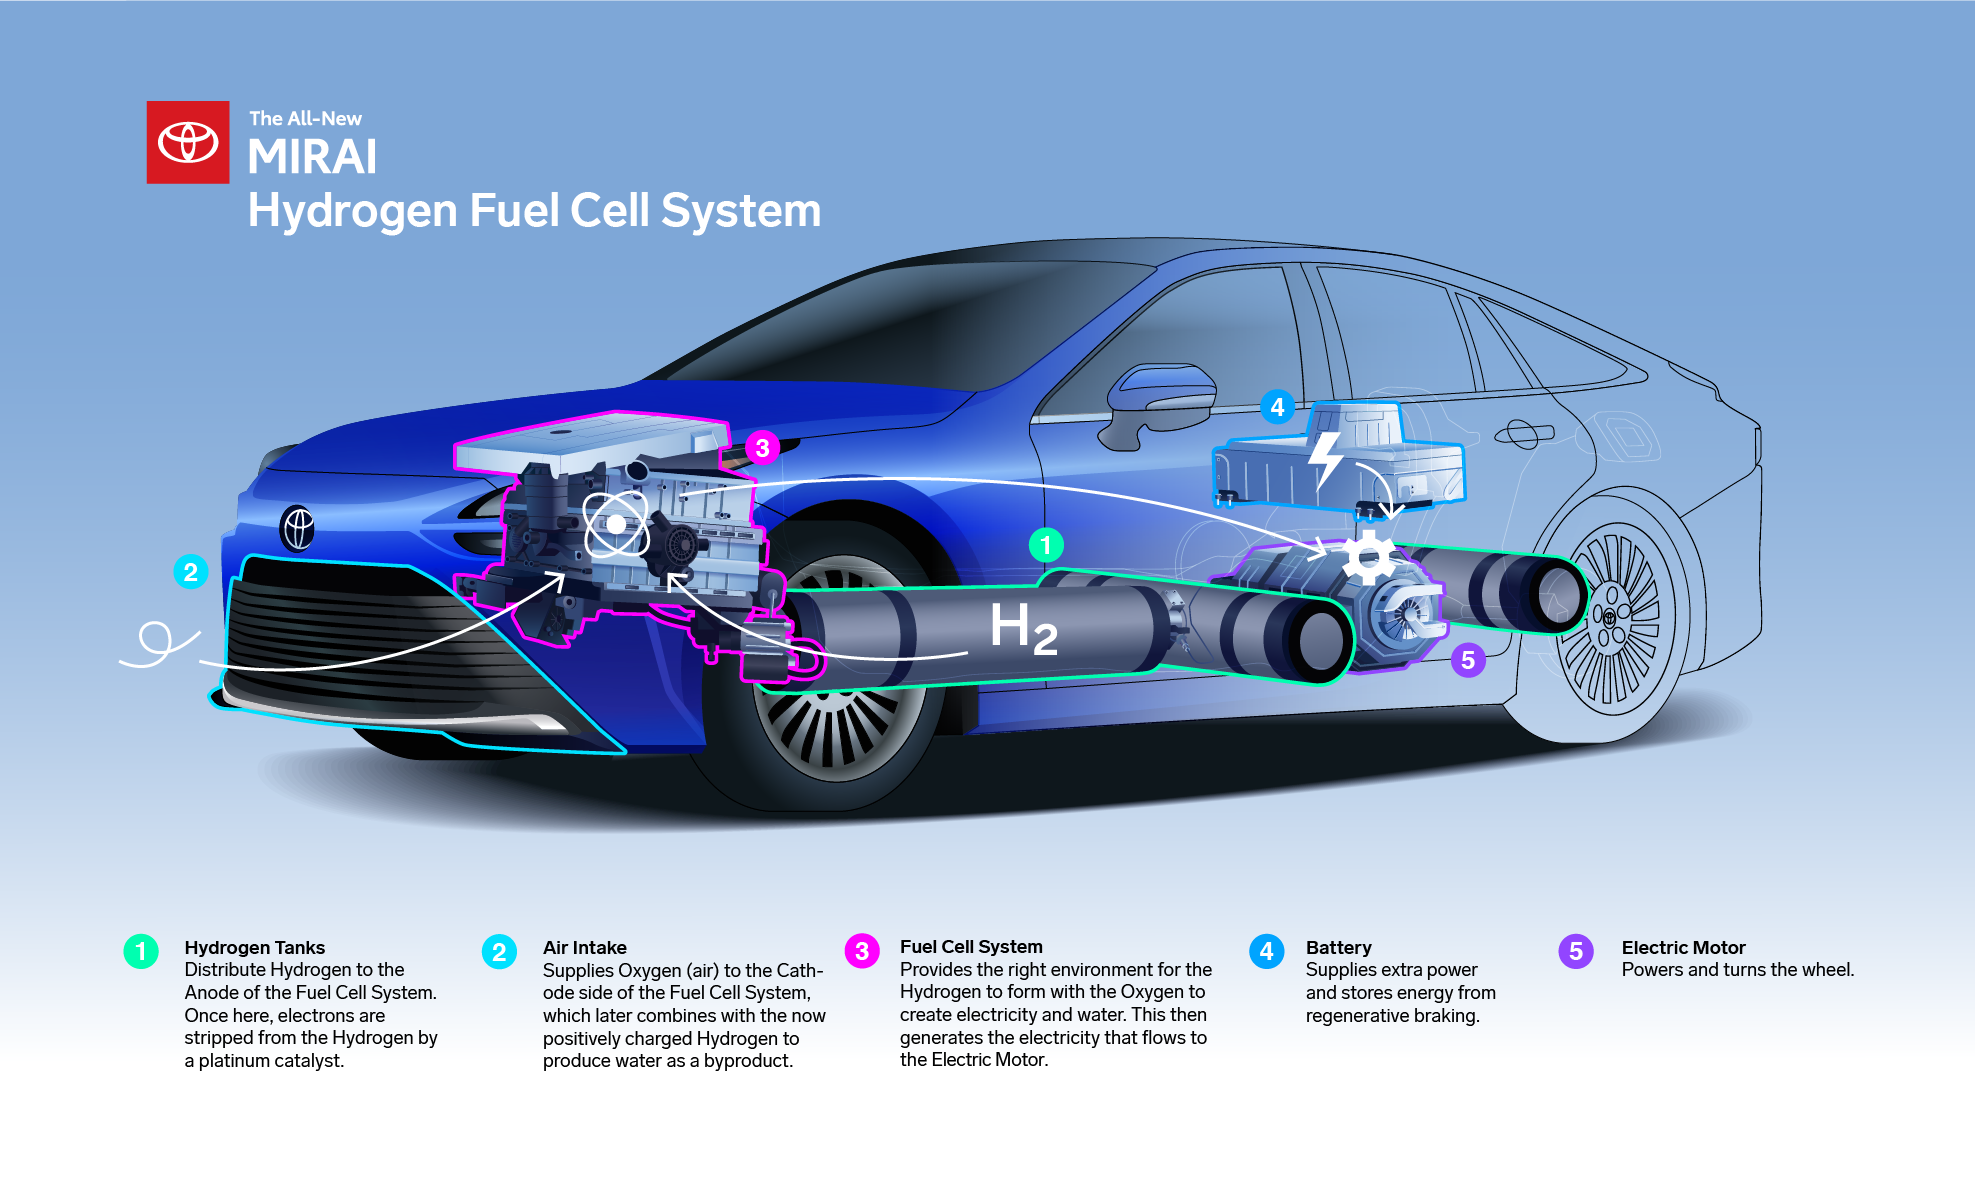 What companies make Fuel Cell Electric Vehicles?